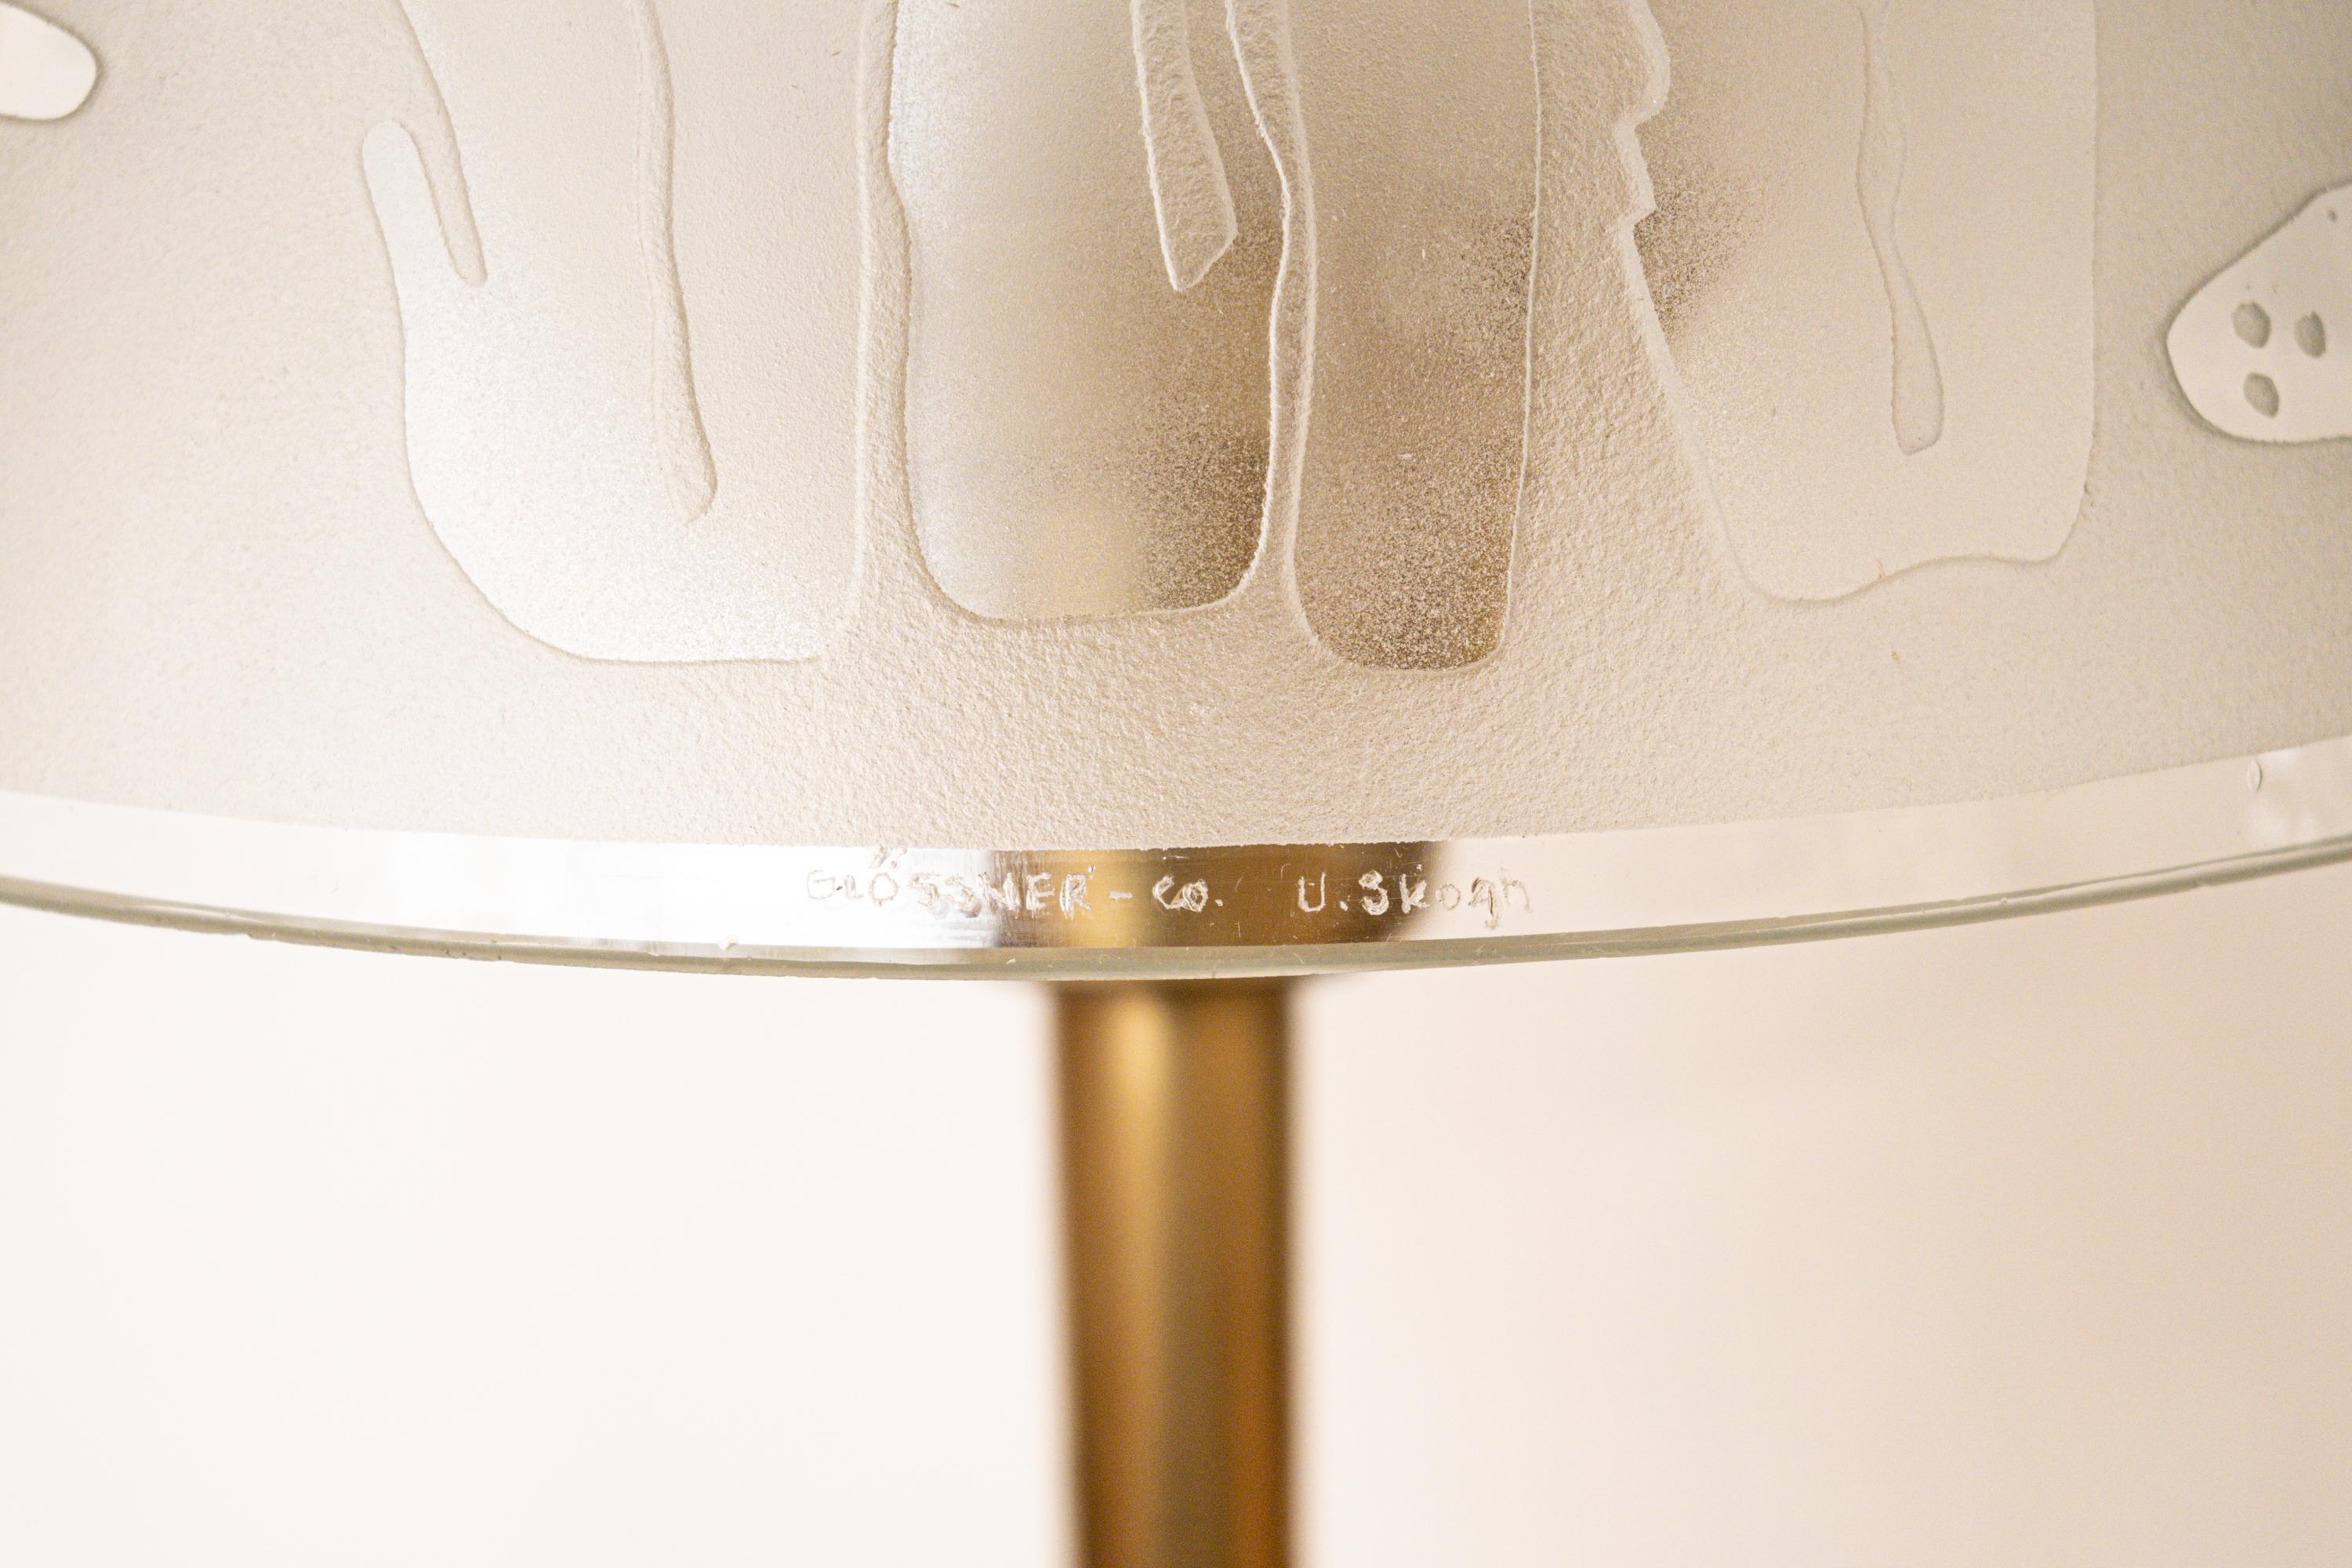 1940s U. Skogh Floor Lamp Produced by Glössner & Co. In Good Condition For Sale In New York, NY